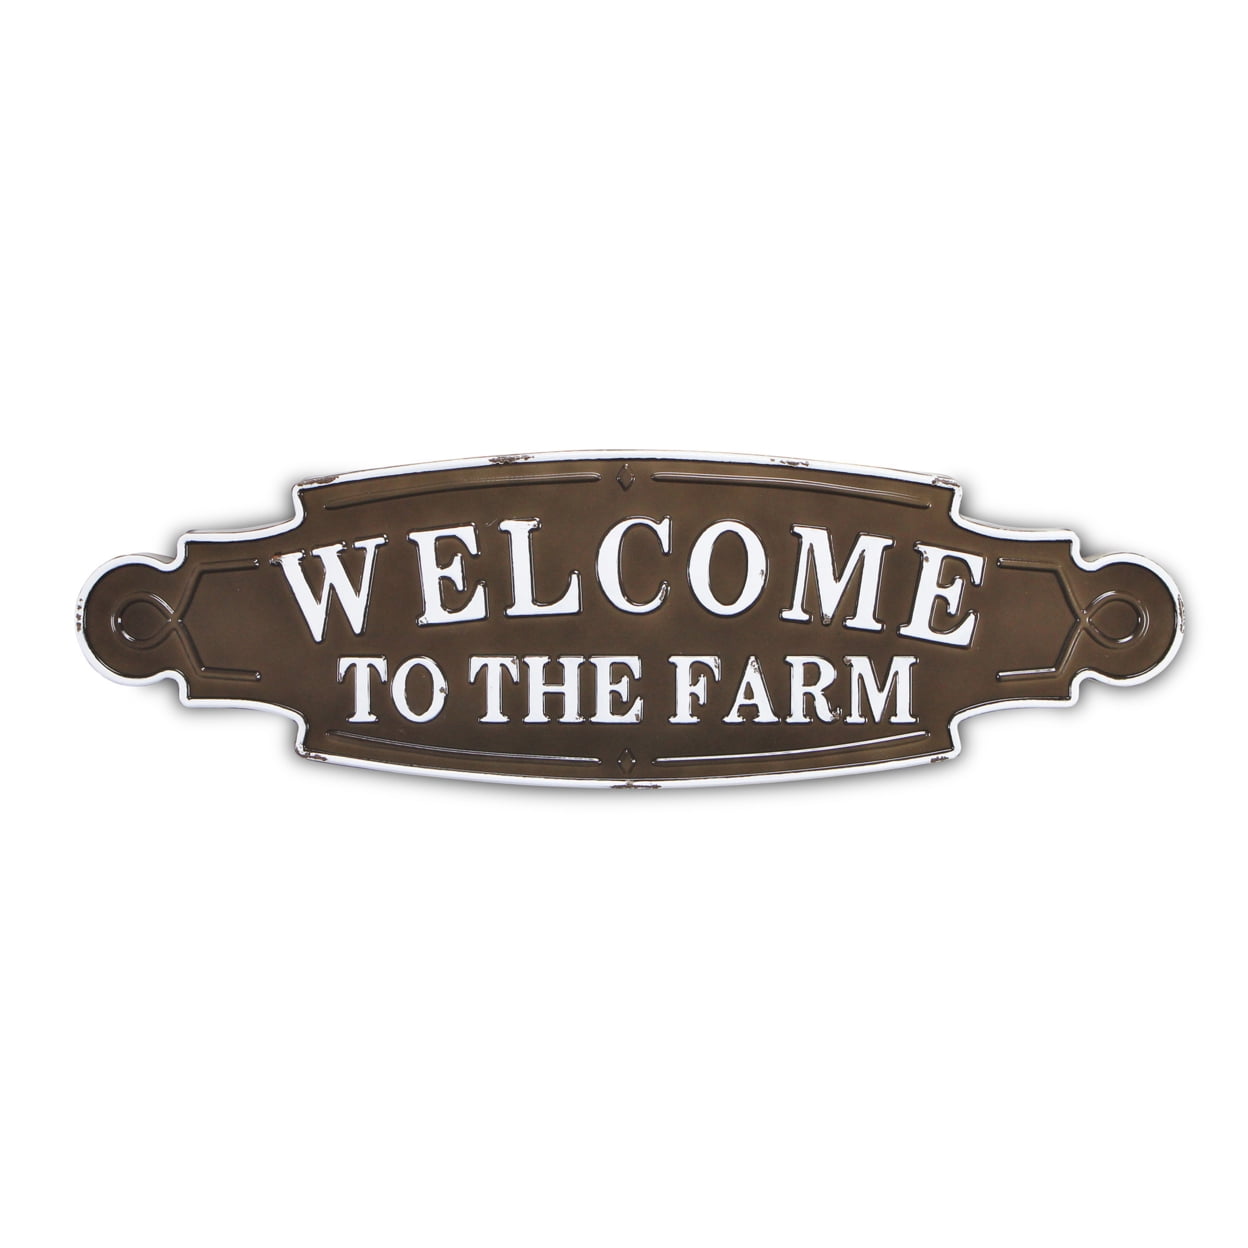 5010 Lacquered Black & White Metal Wall Sign - Welcome To The Farm